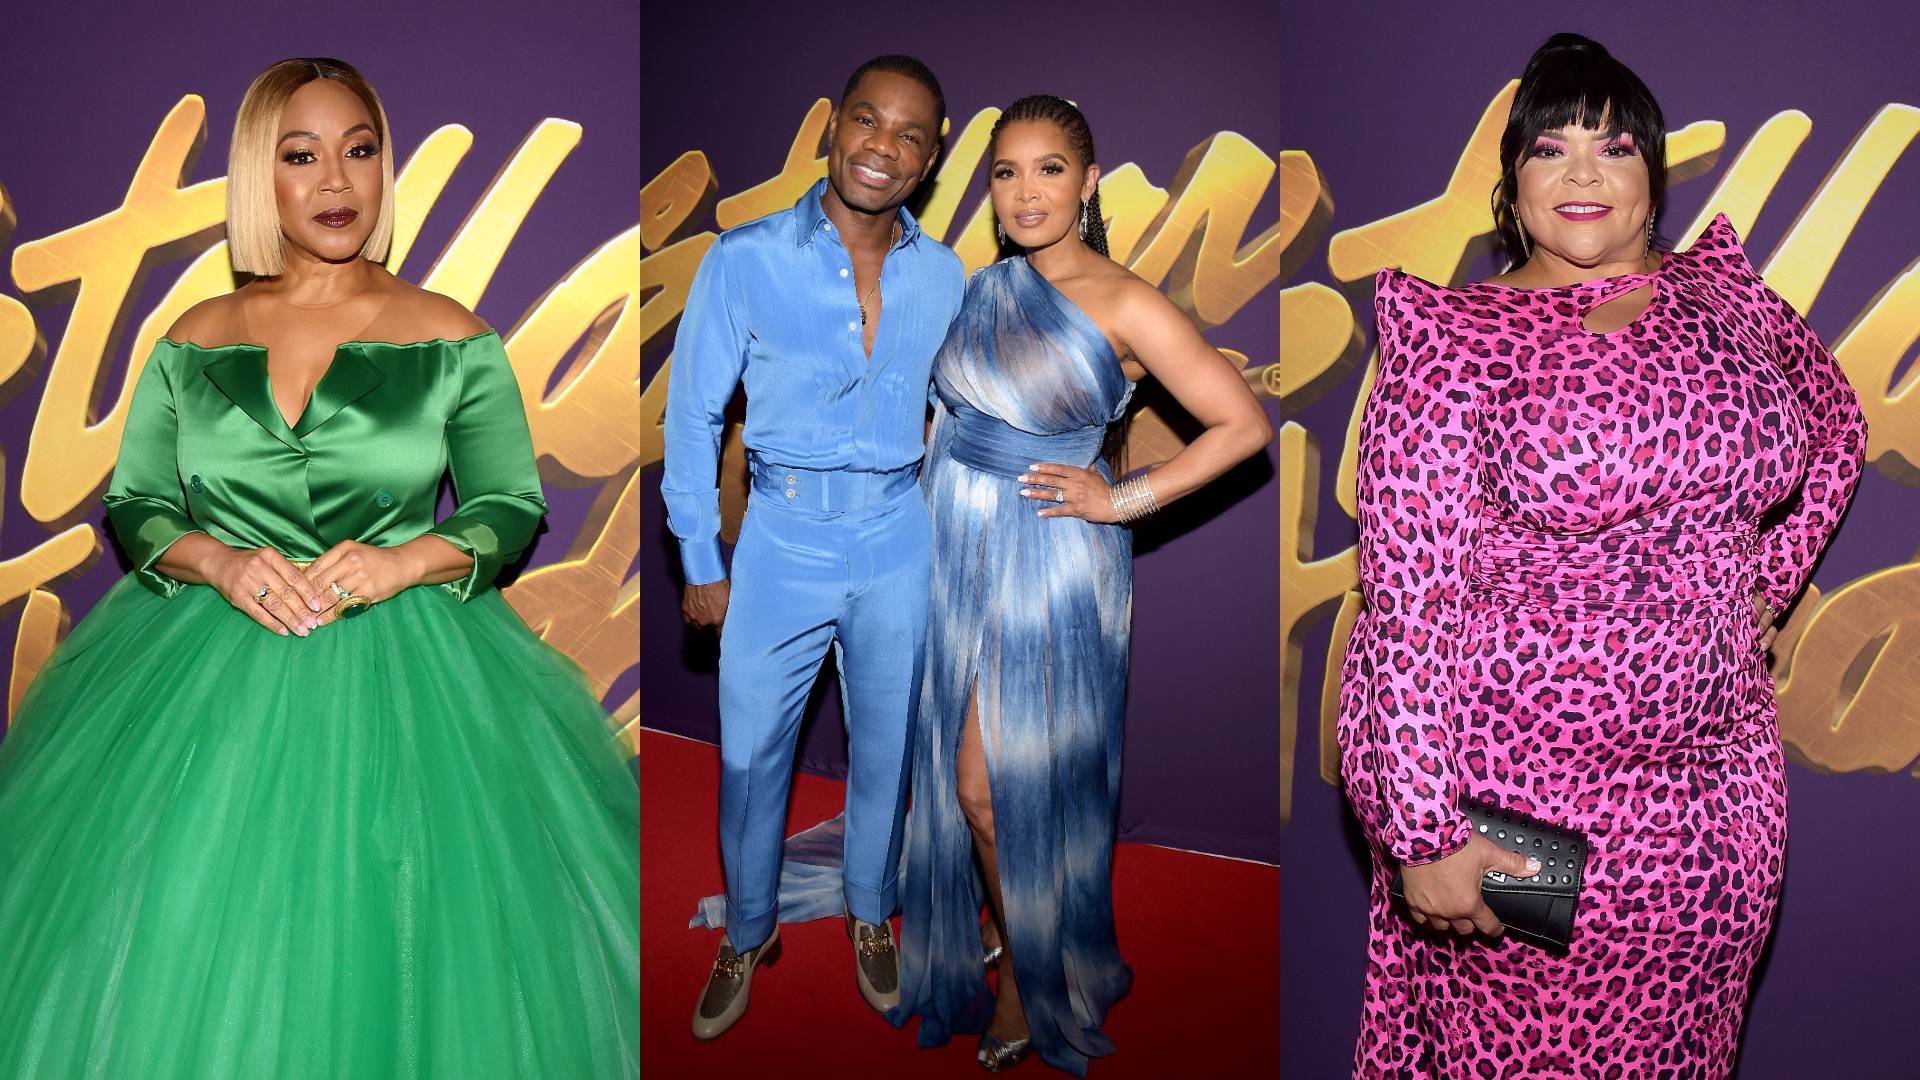 See The Stylish Looks Spotted On The Red Carpet Of The 37th Annual Stellar Gospel Music Awards!